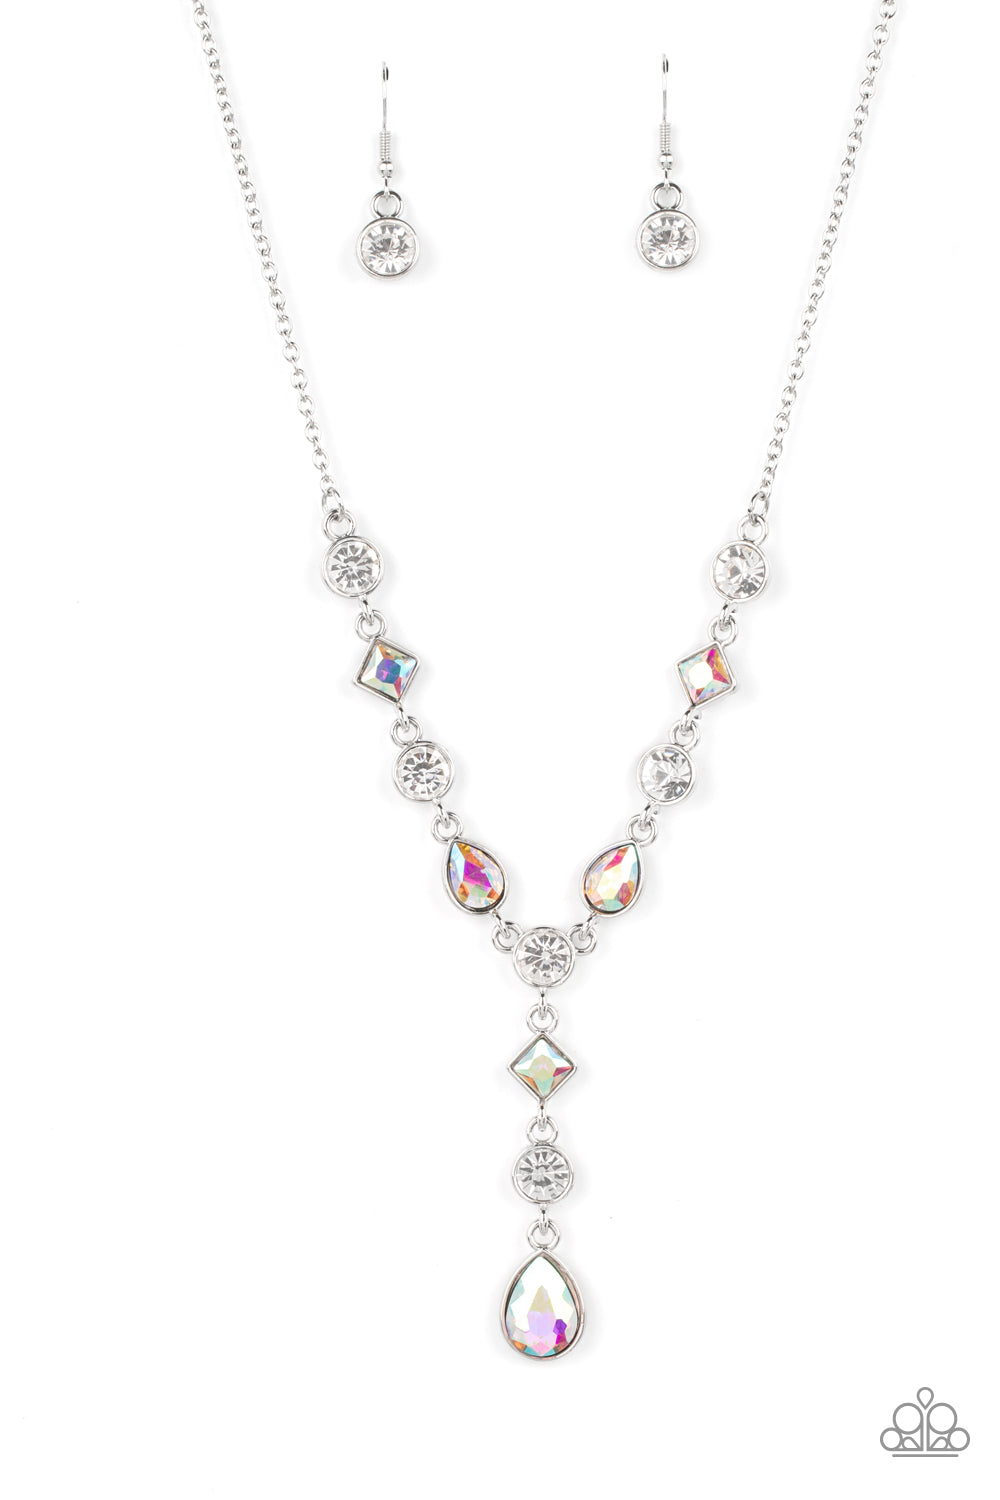 Paparazzi Accessories - Forget the Crown - Multi Iridescent Necklaces brilliant white round-cut rhinestones alternate between diamonds and teardrops with an iridescent finish, creating an elegant lariat fit for royalty. Due to its prismatic palette, color may vary. Features an adjustable clasp closure.  Sold as one individual necklace. Includes one pair of matching earrings.